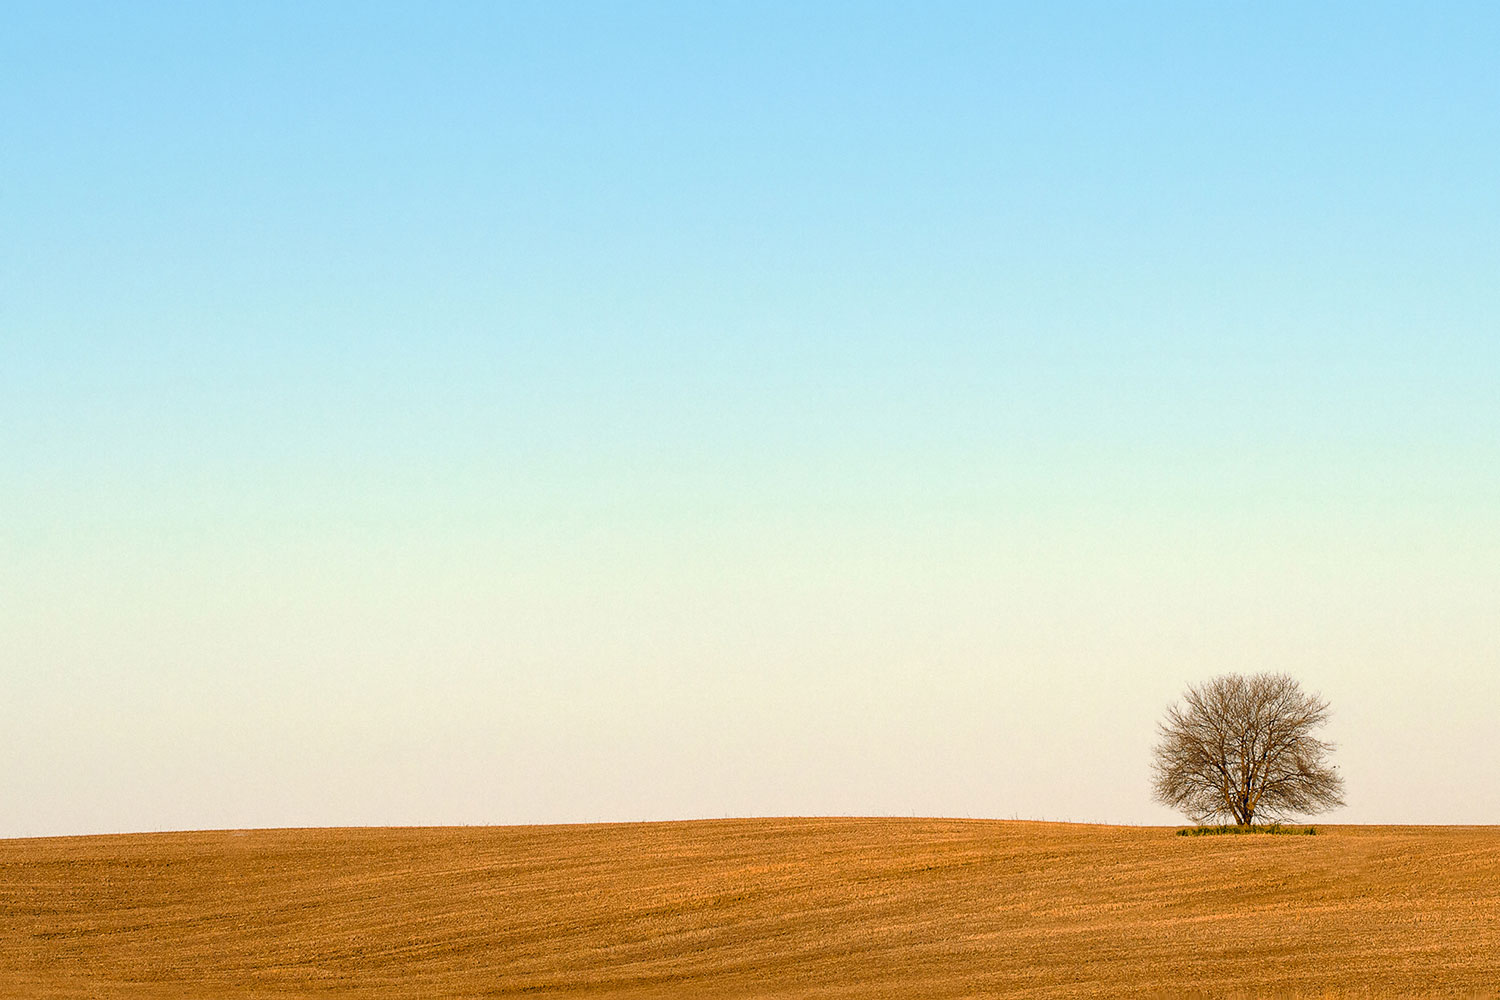 A lone, leafless tree stands tall in an otherwise featureless field.&nbsp;→ Buy a Print